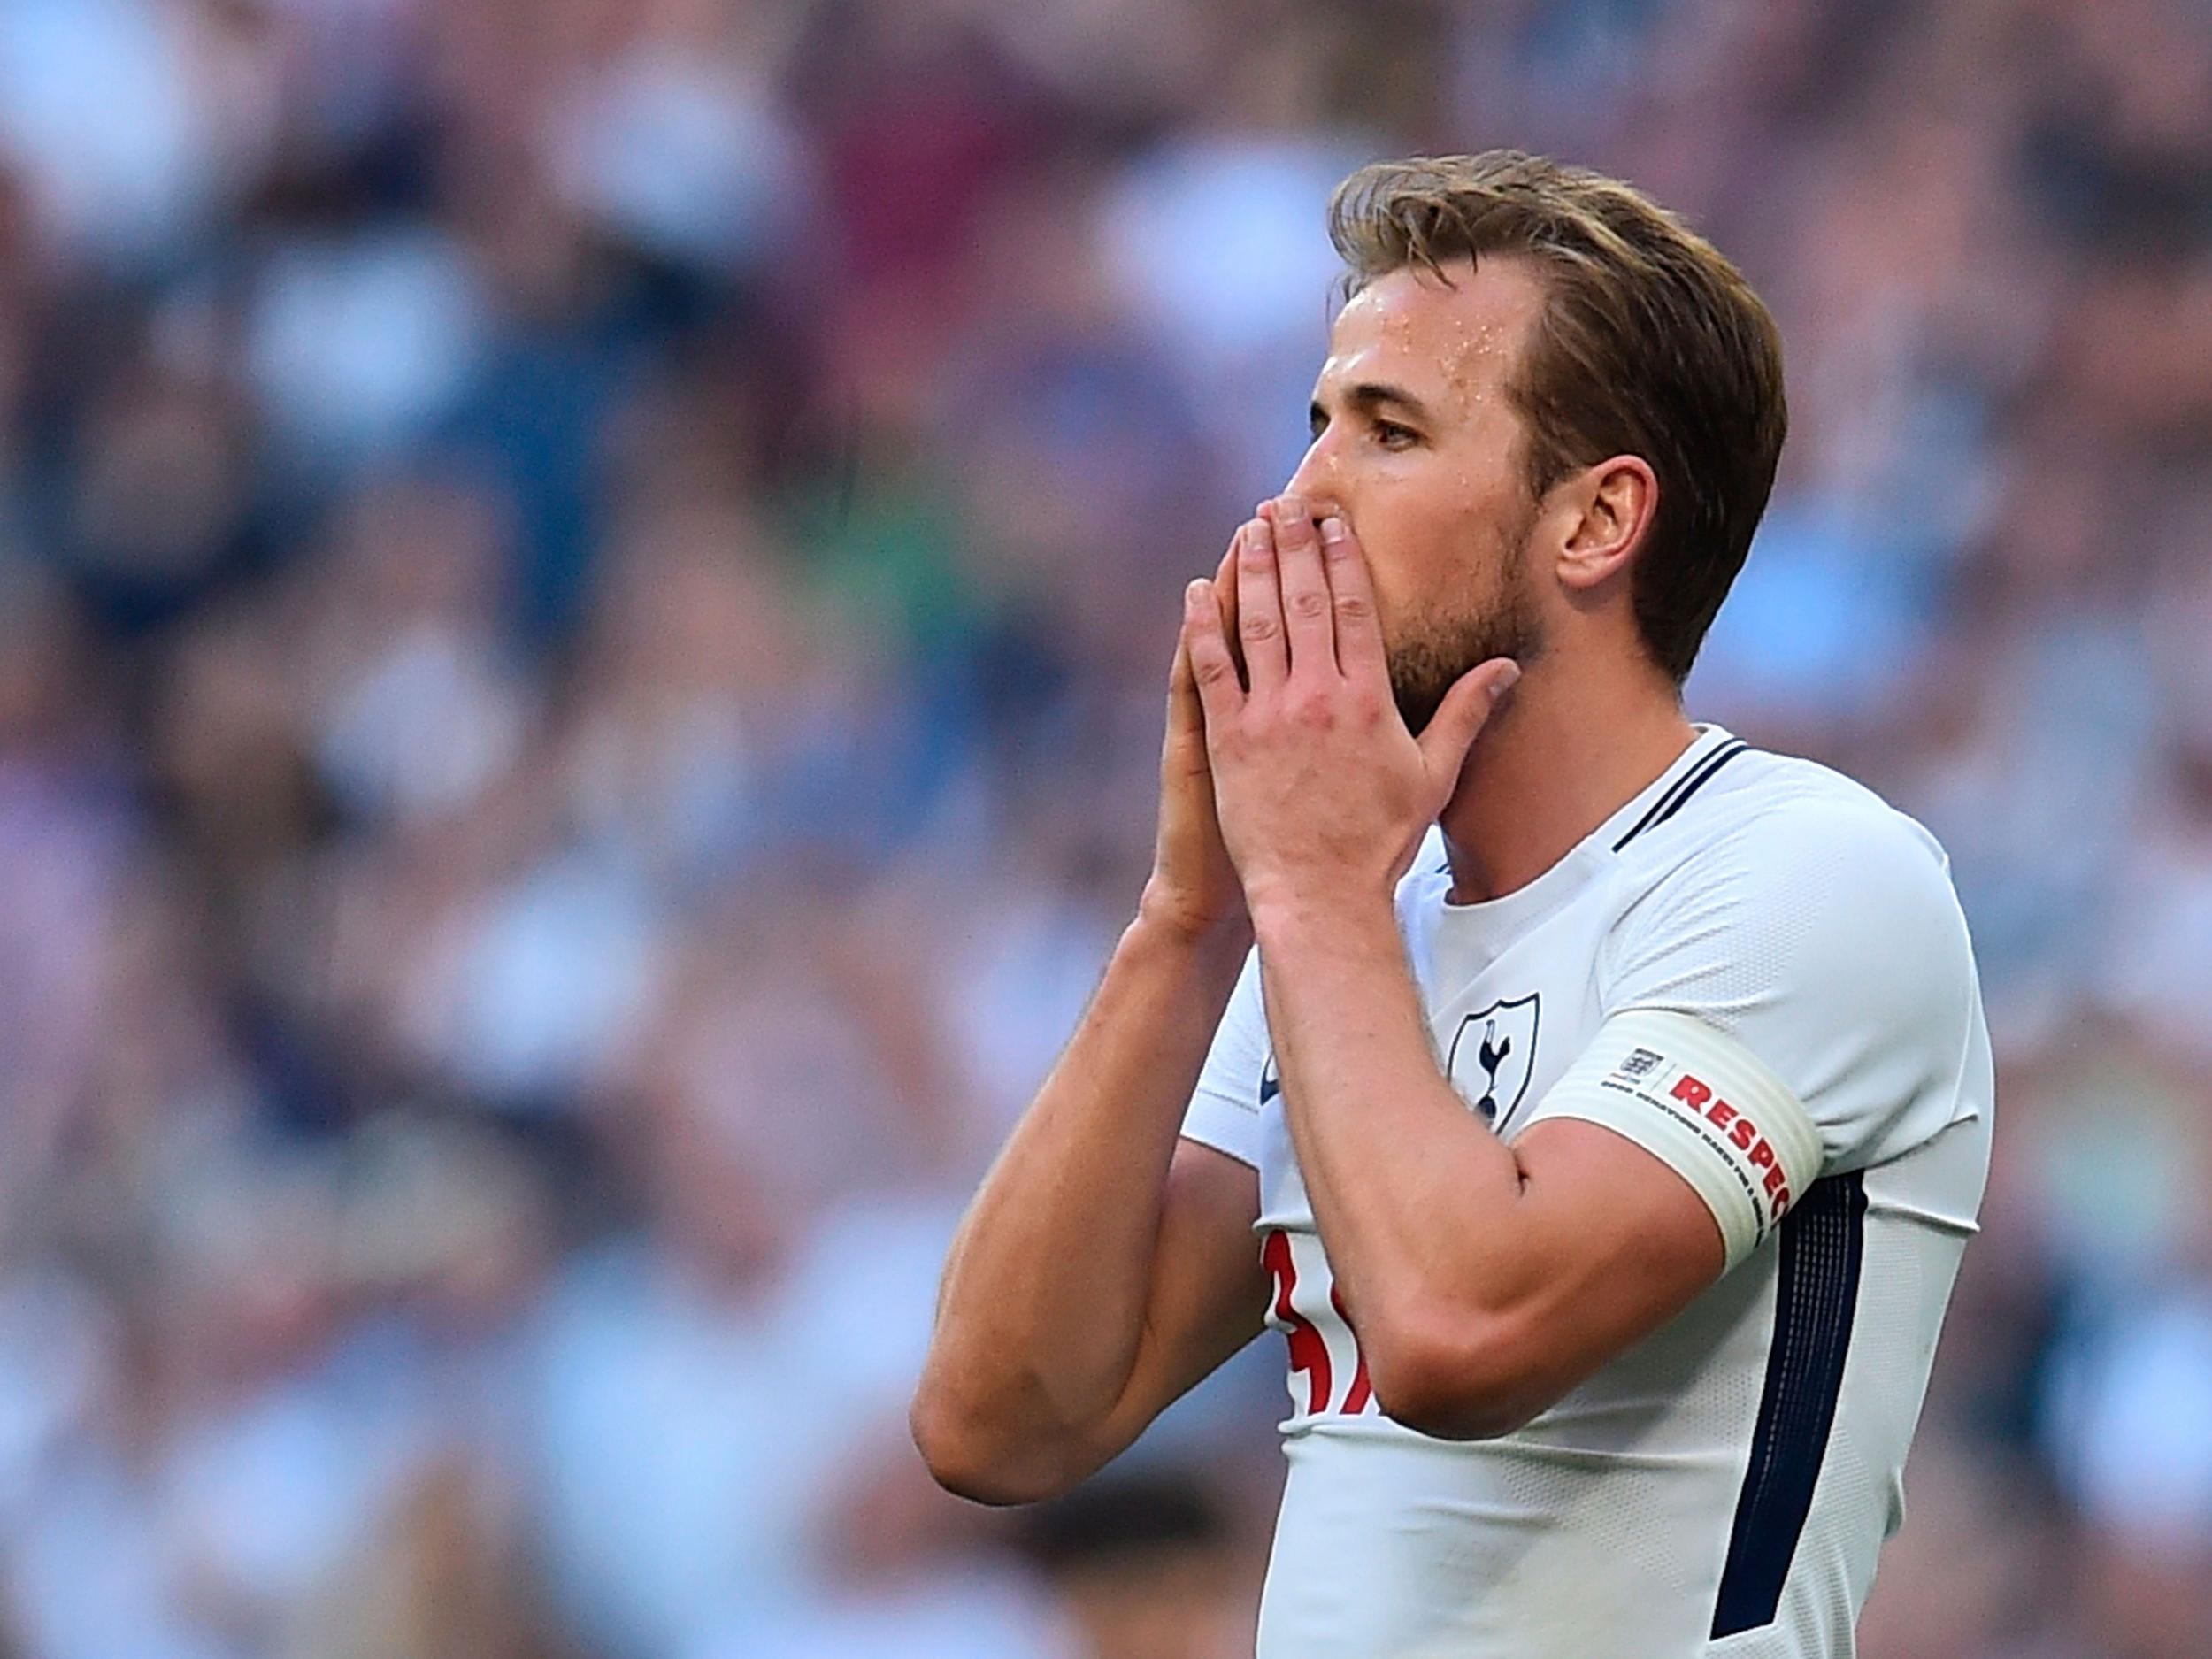 Tottenham once again failed to make it into the FA Cup final